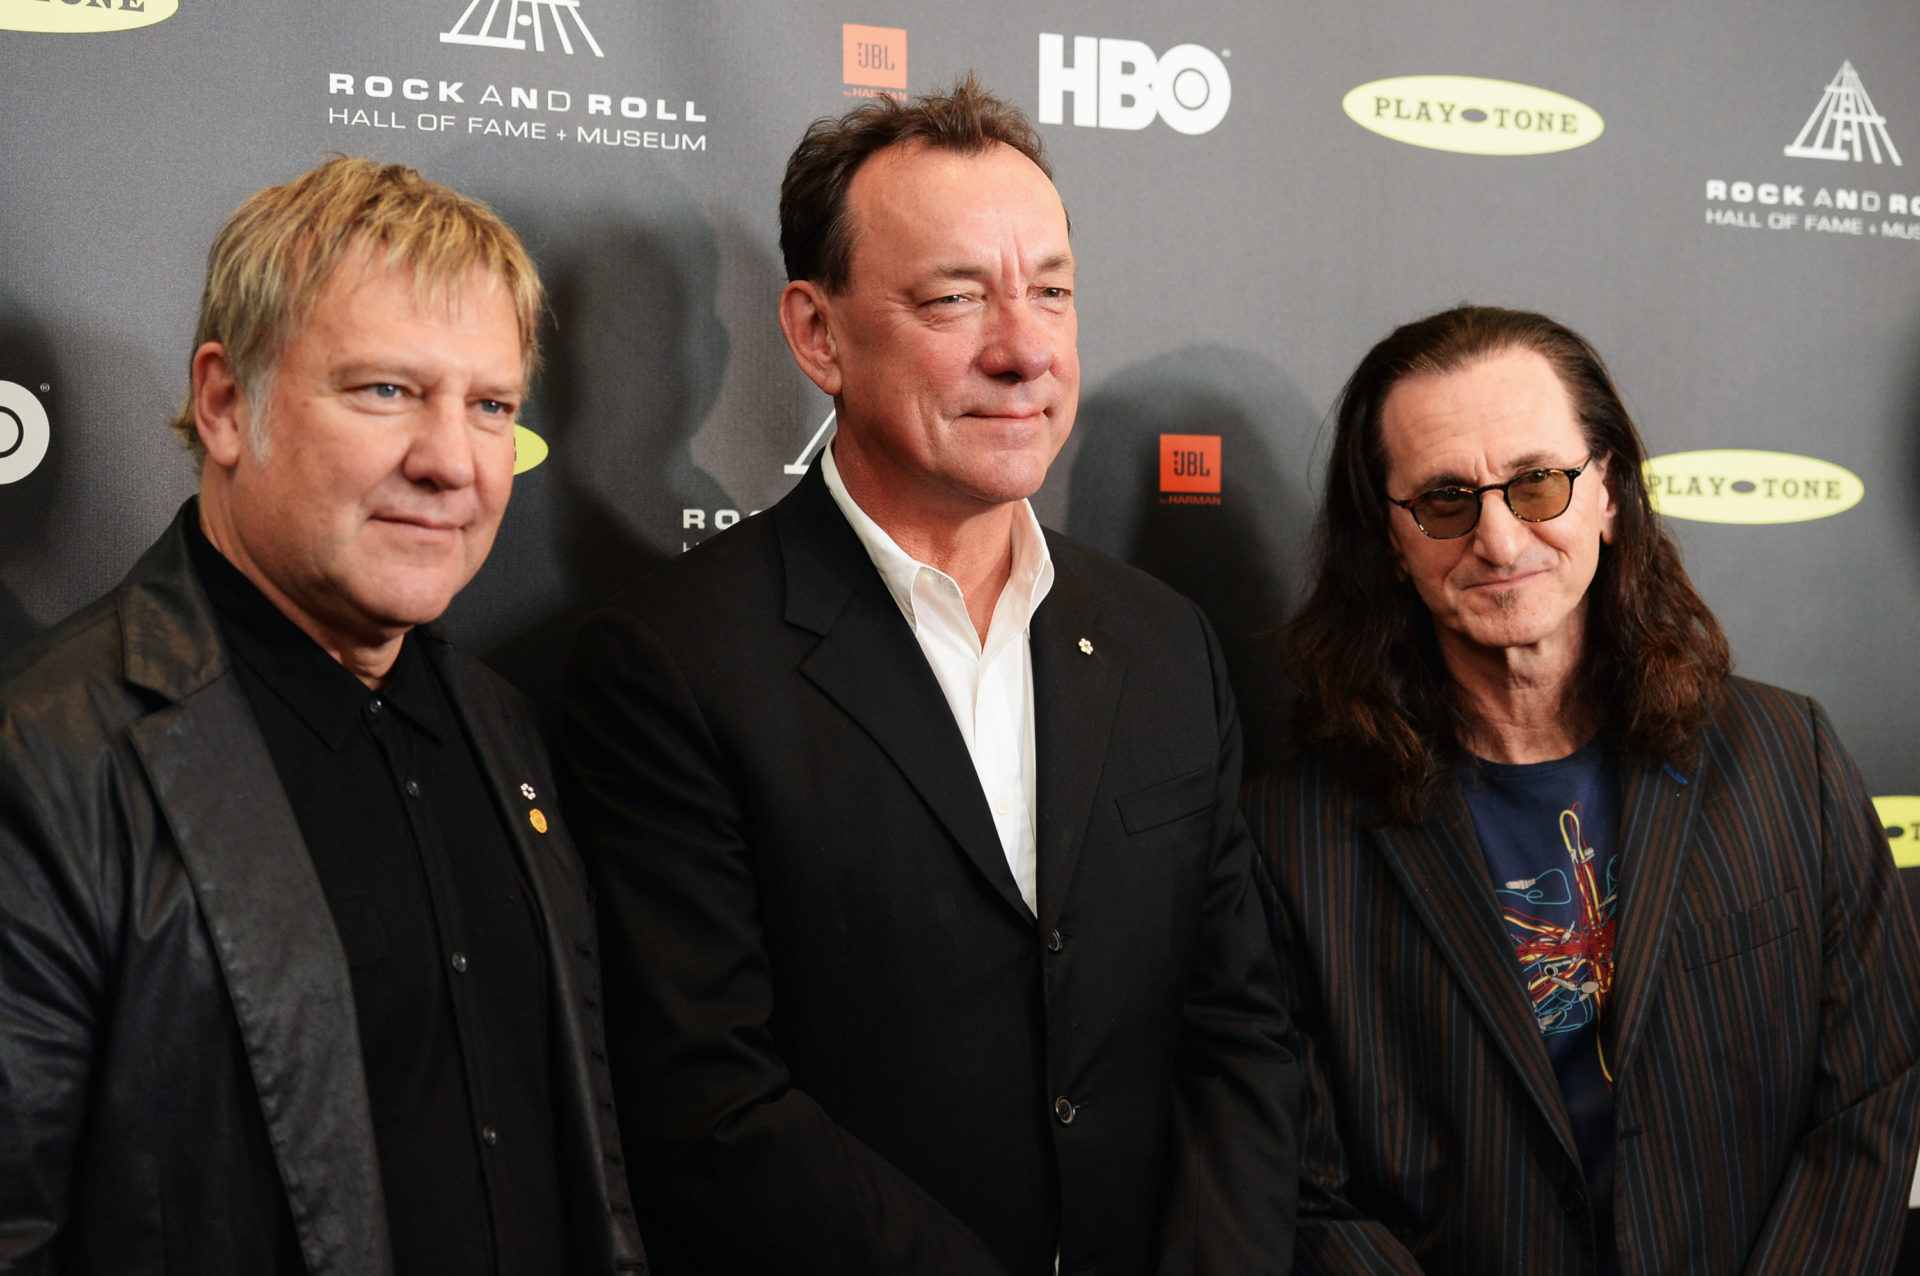 28th Annual Rock And Roll Hall Of Fame Induction Ceremony - Arrivals